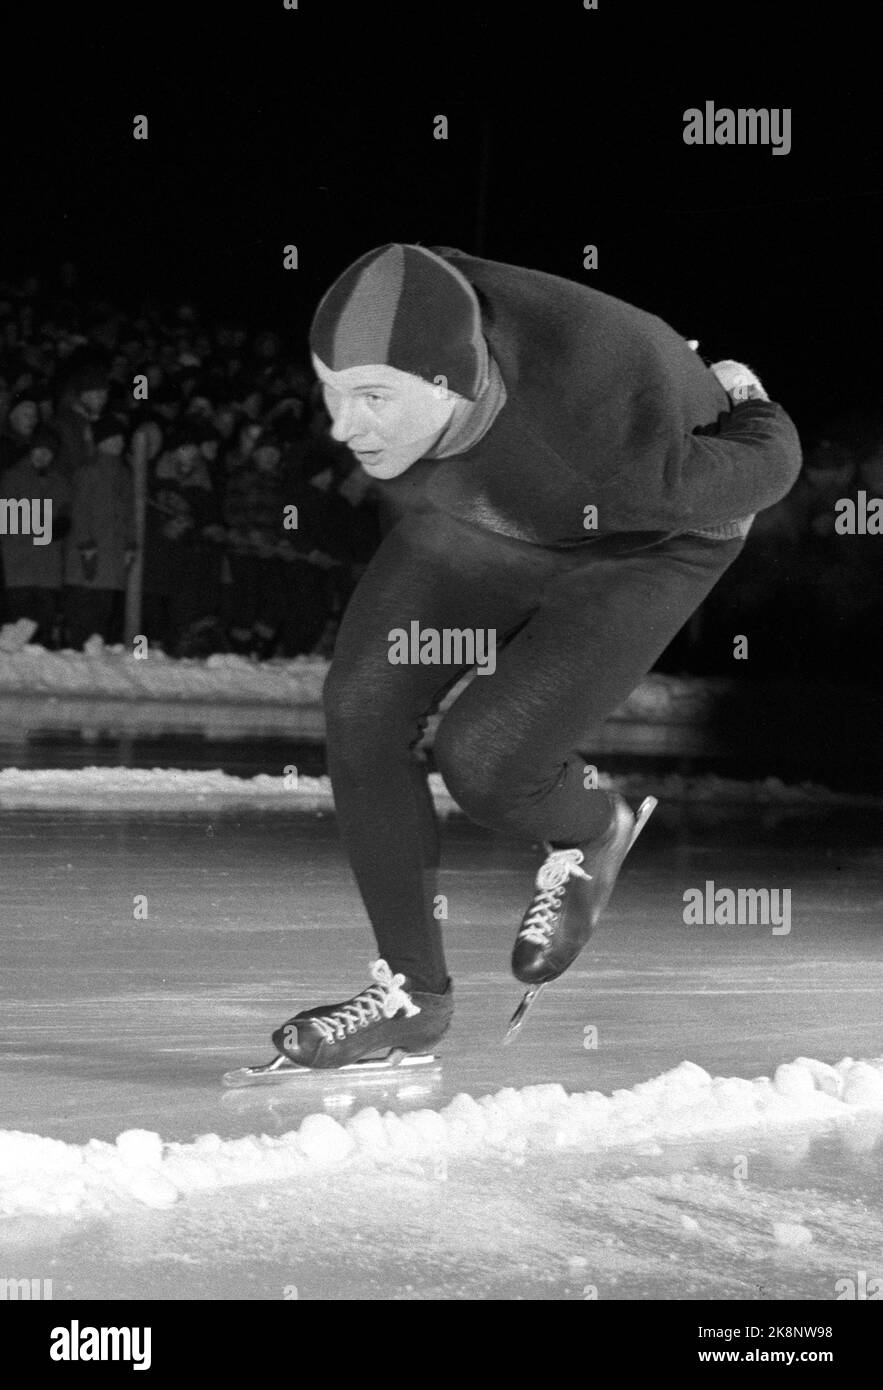 Hønefoss 19600116-17. NM on skating 1960. Knut Johannesen 'Kuppern' in action of 10,000 meters where he won his 5. Norwegian Championship more superior than ever before. Photo: Ivar Aaserud / Current / NTB Stock Photo